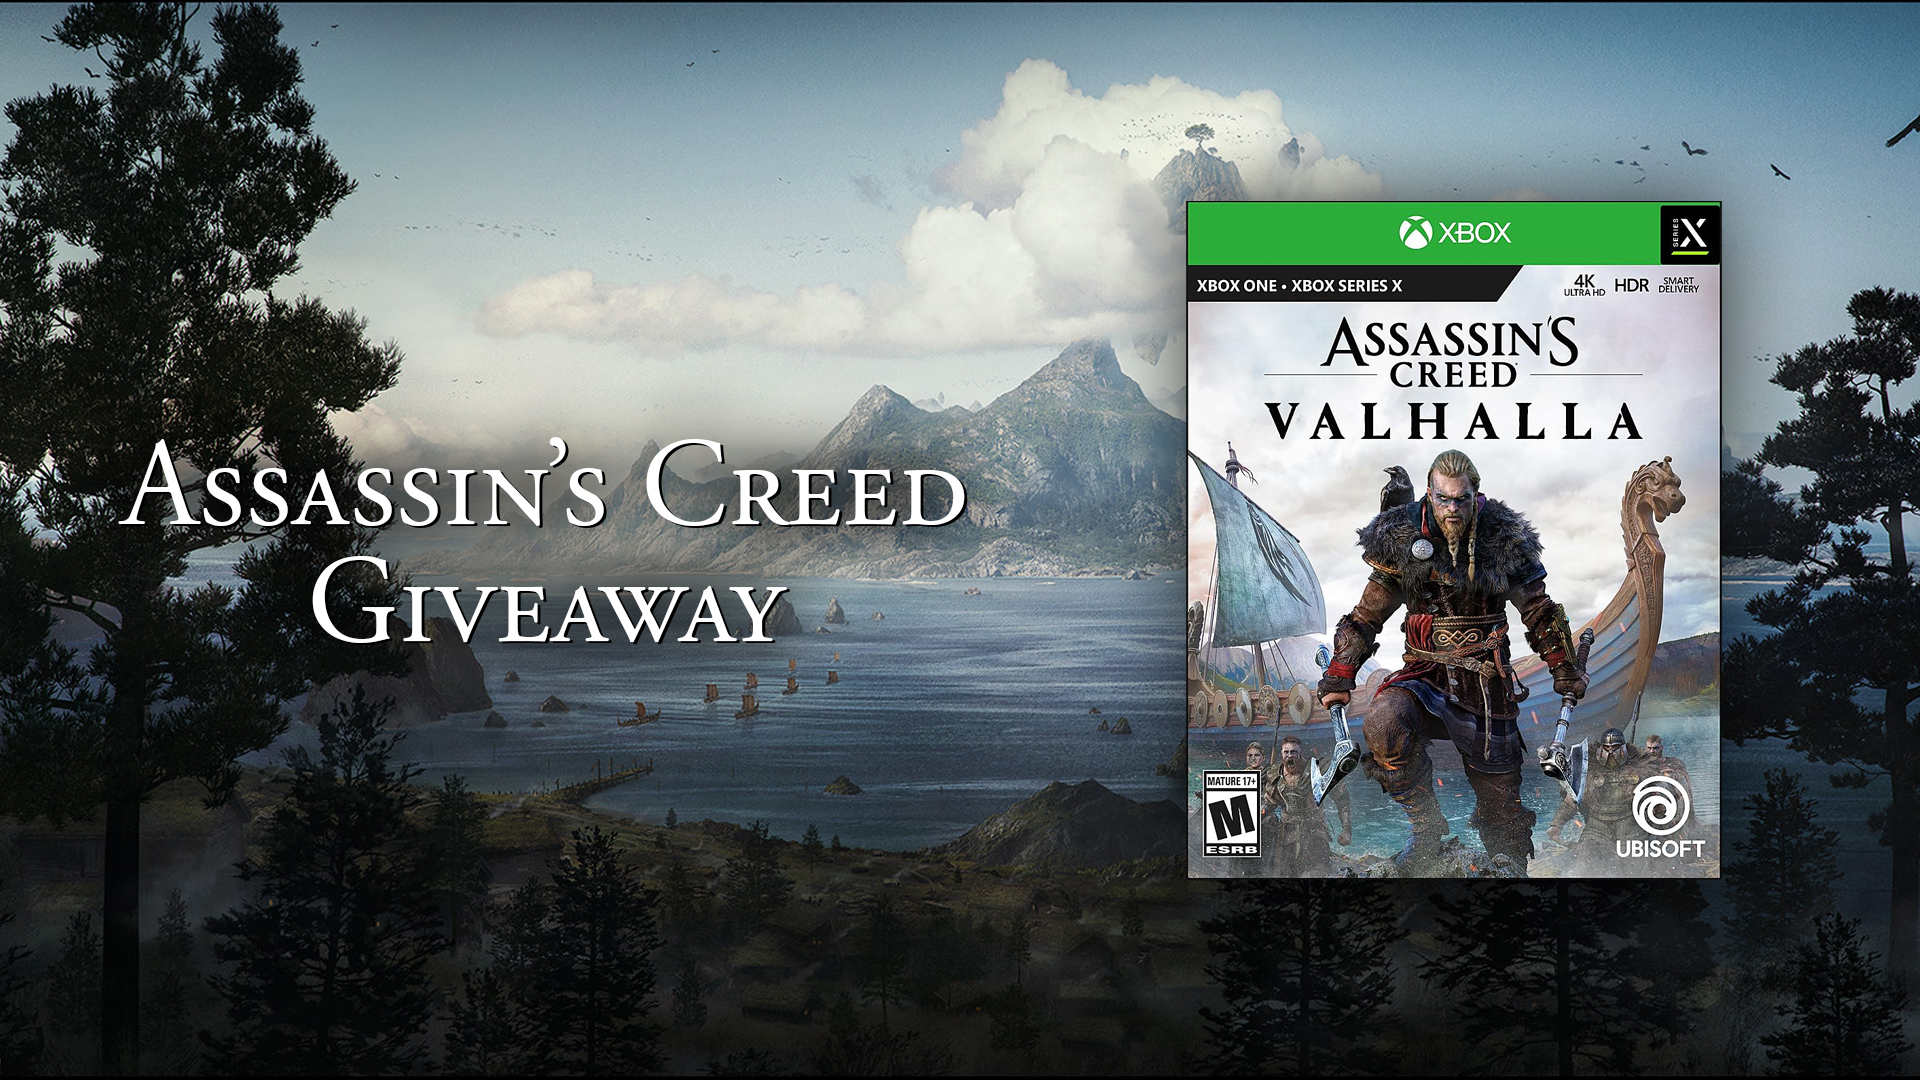 Assassin’s Creed Valhalla Giveaway